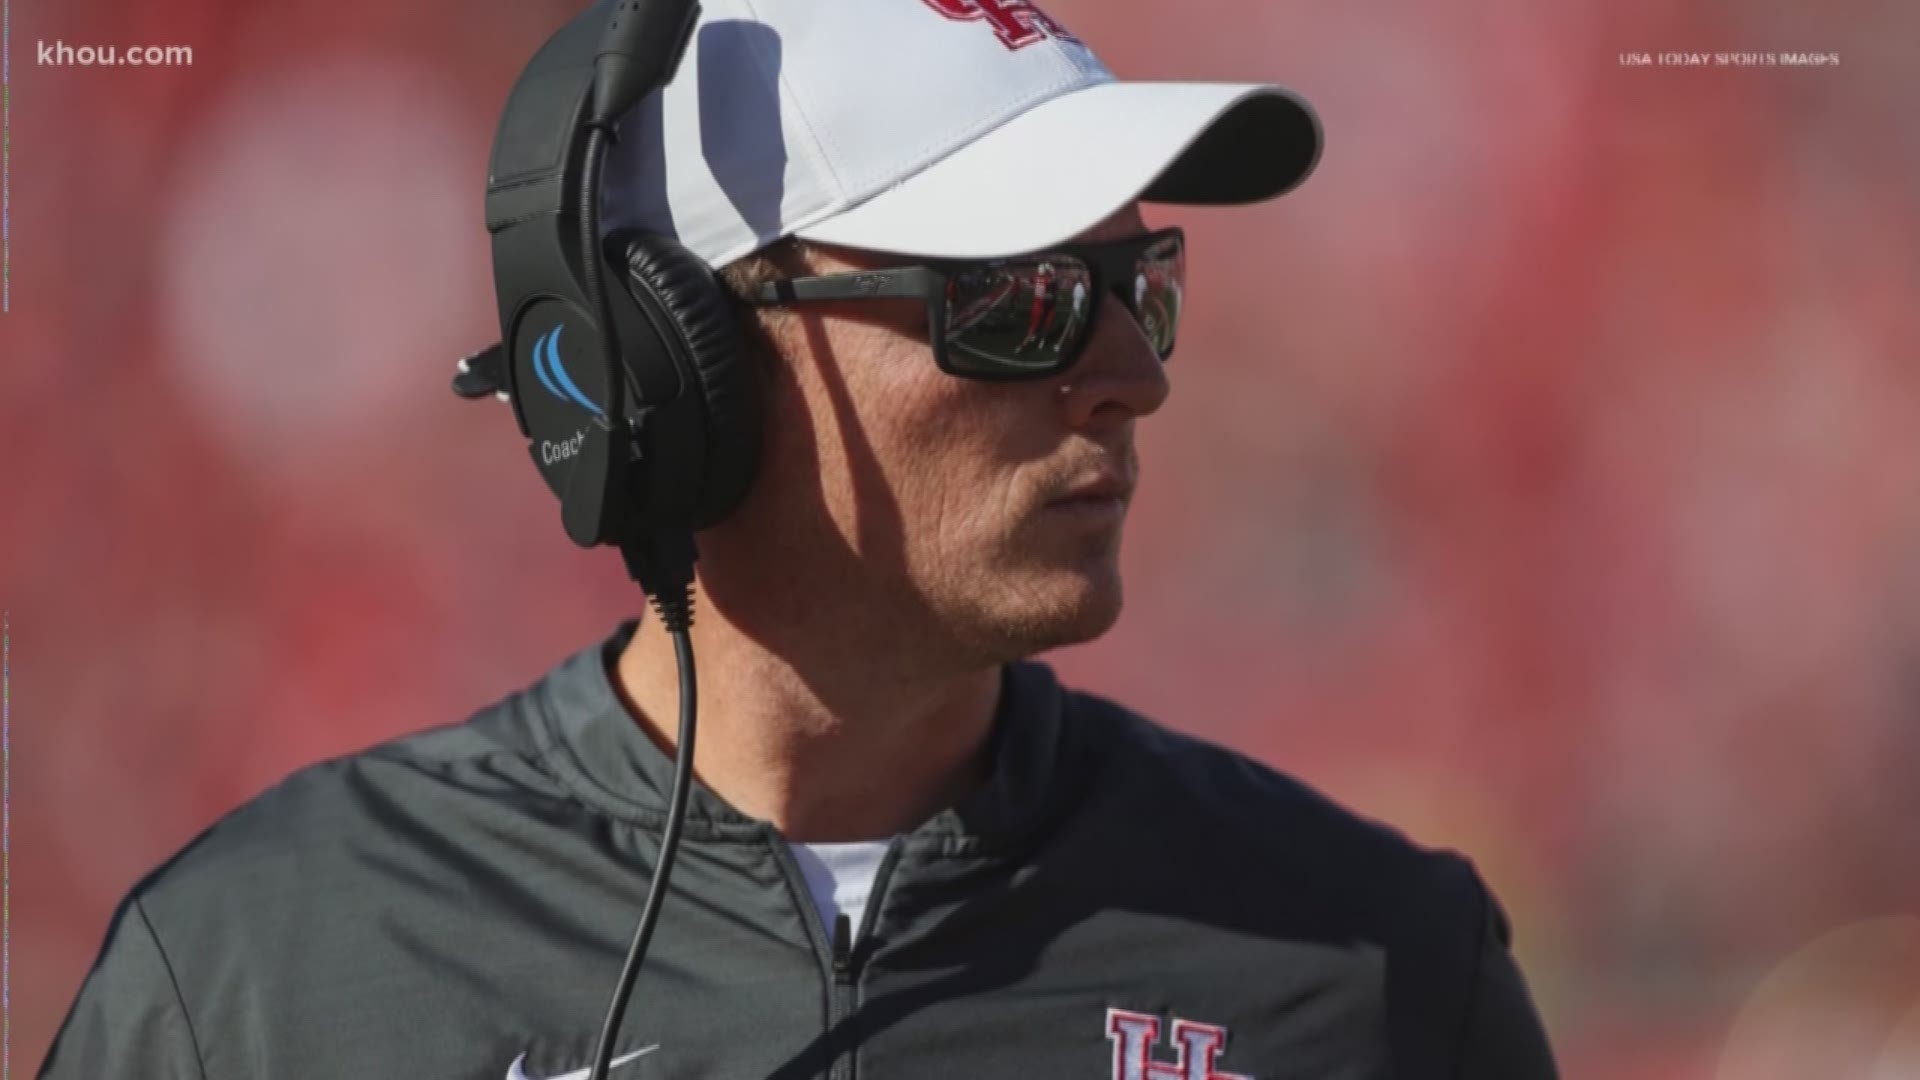 Some big changes are underway at the University of Houston. The head football coach is out just after two seasons.